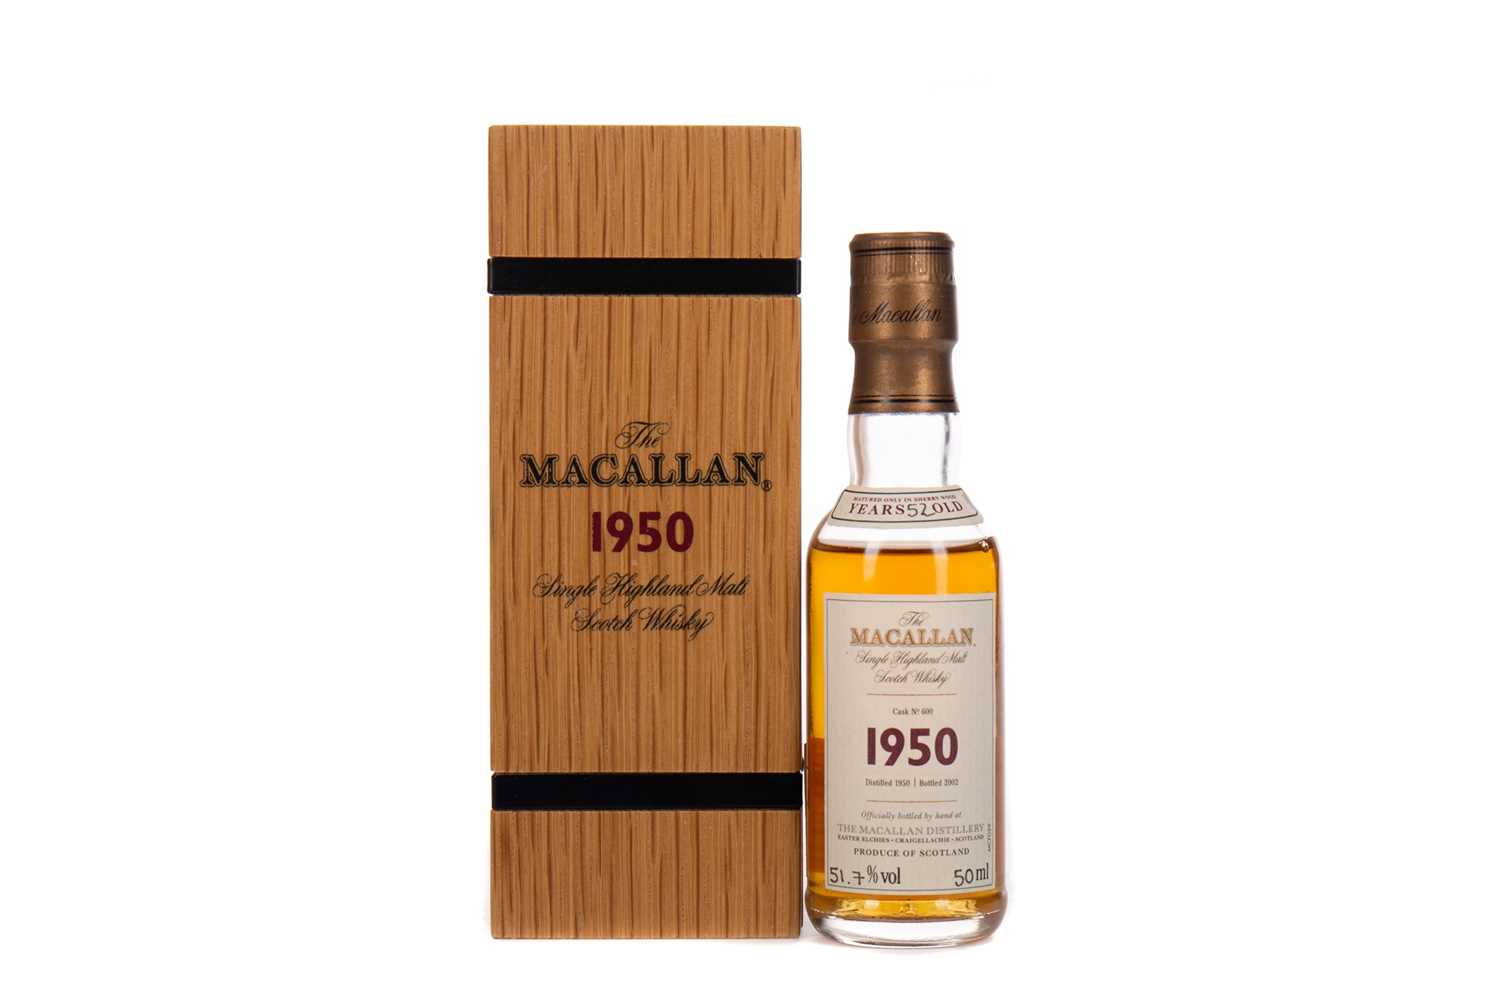 Lot 163 - MACALLAN 1950 FINE AND RARE MINIATURE AGED 52 YEARS